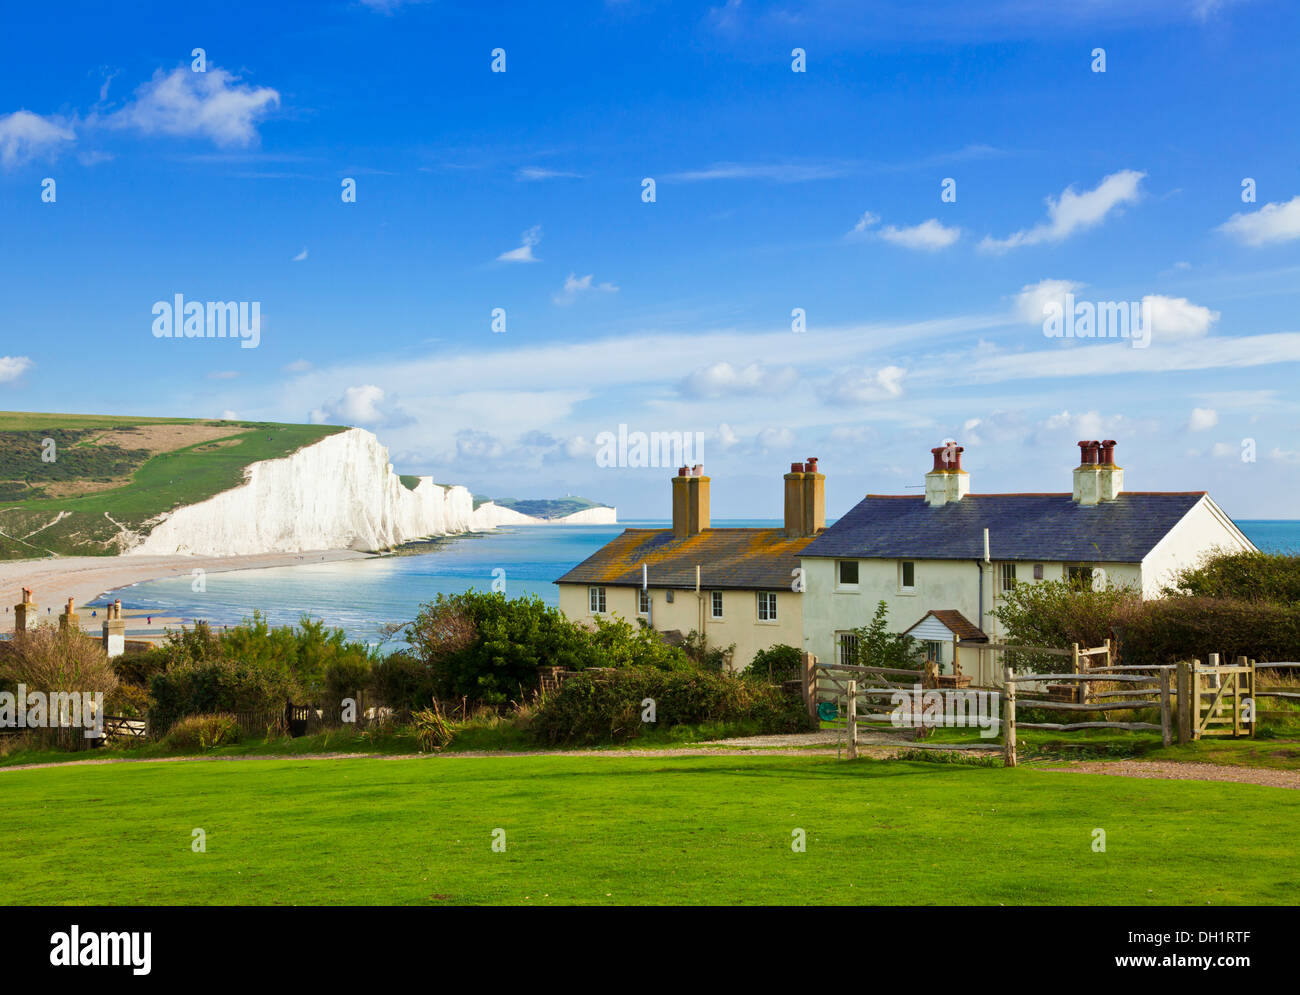 The Seven Sisters Cliffs, The Cottages Coastguard, South Downs Way, South Downs National Park, East Sussex, England, UK, GB, Europa Foto Stock